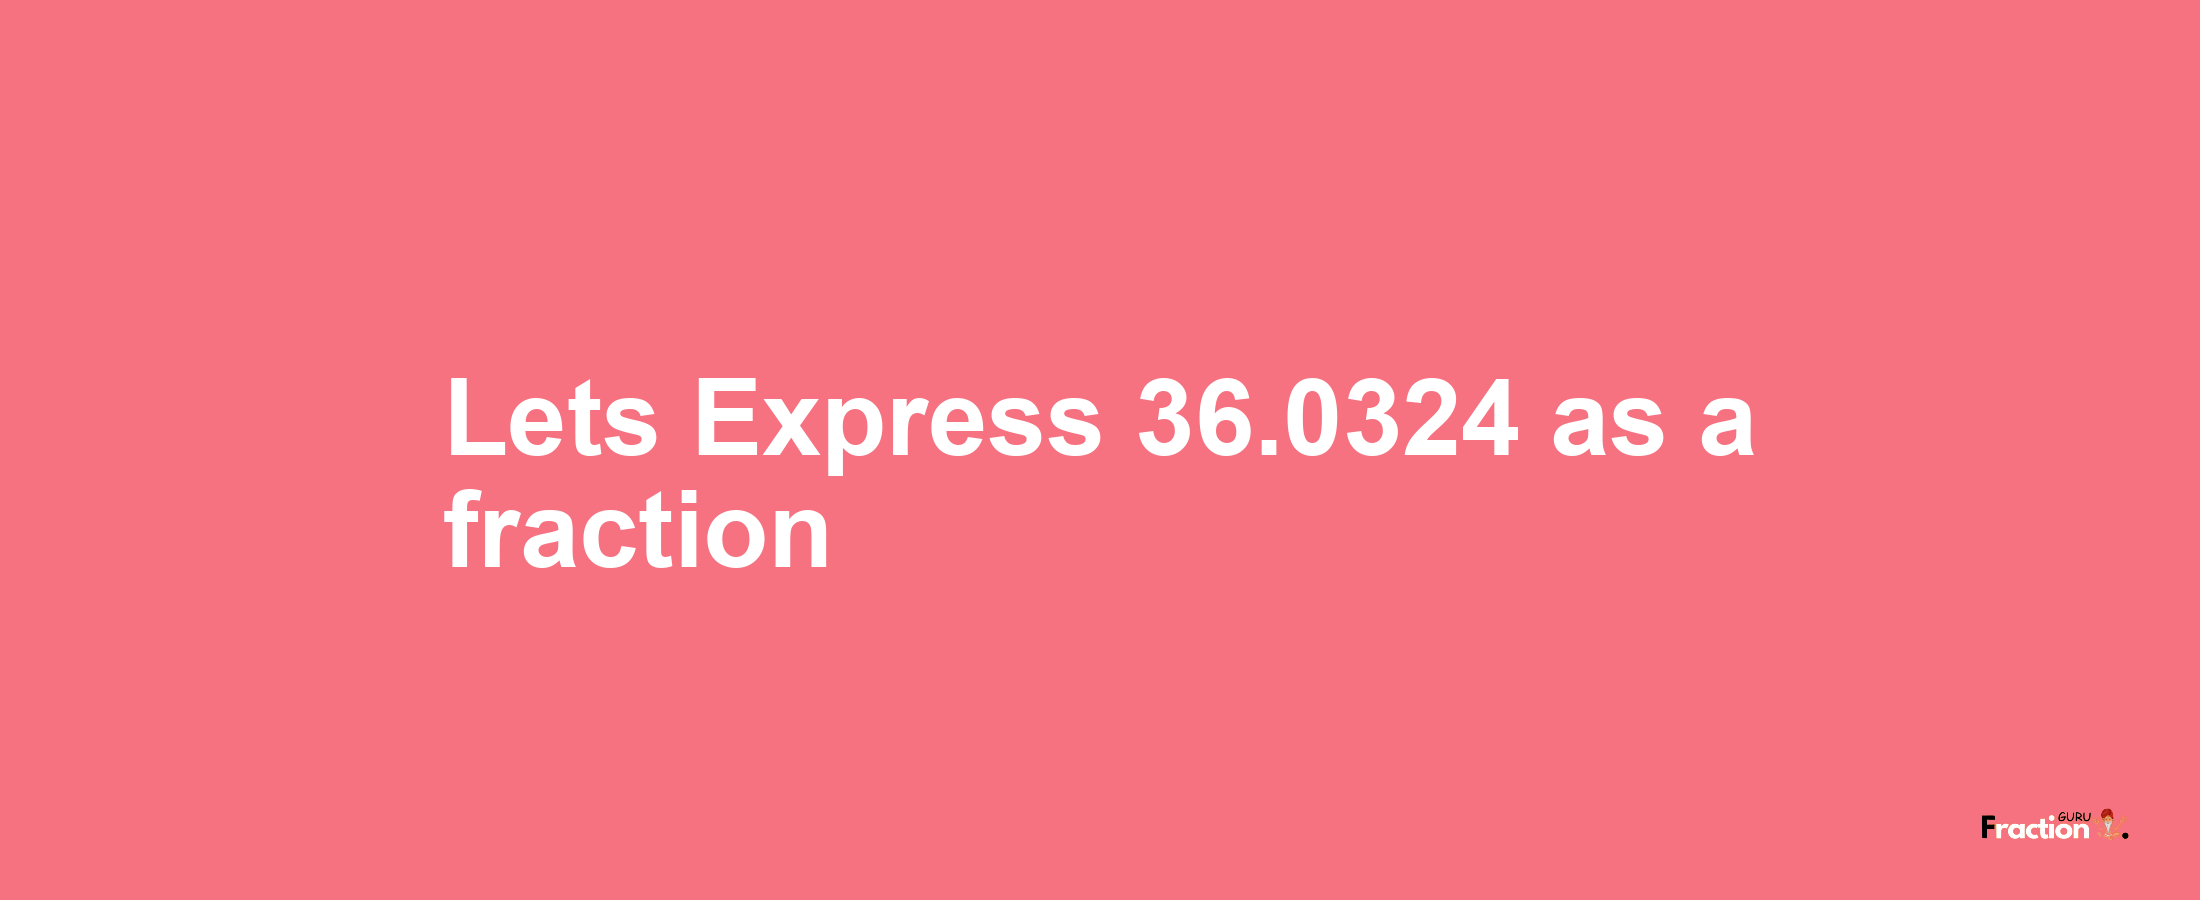 Lets Express 36.0324 as afraction